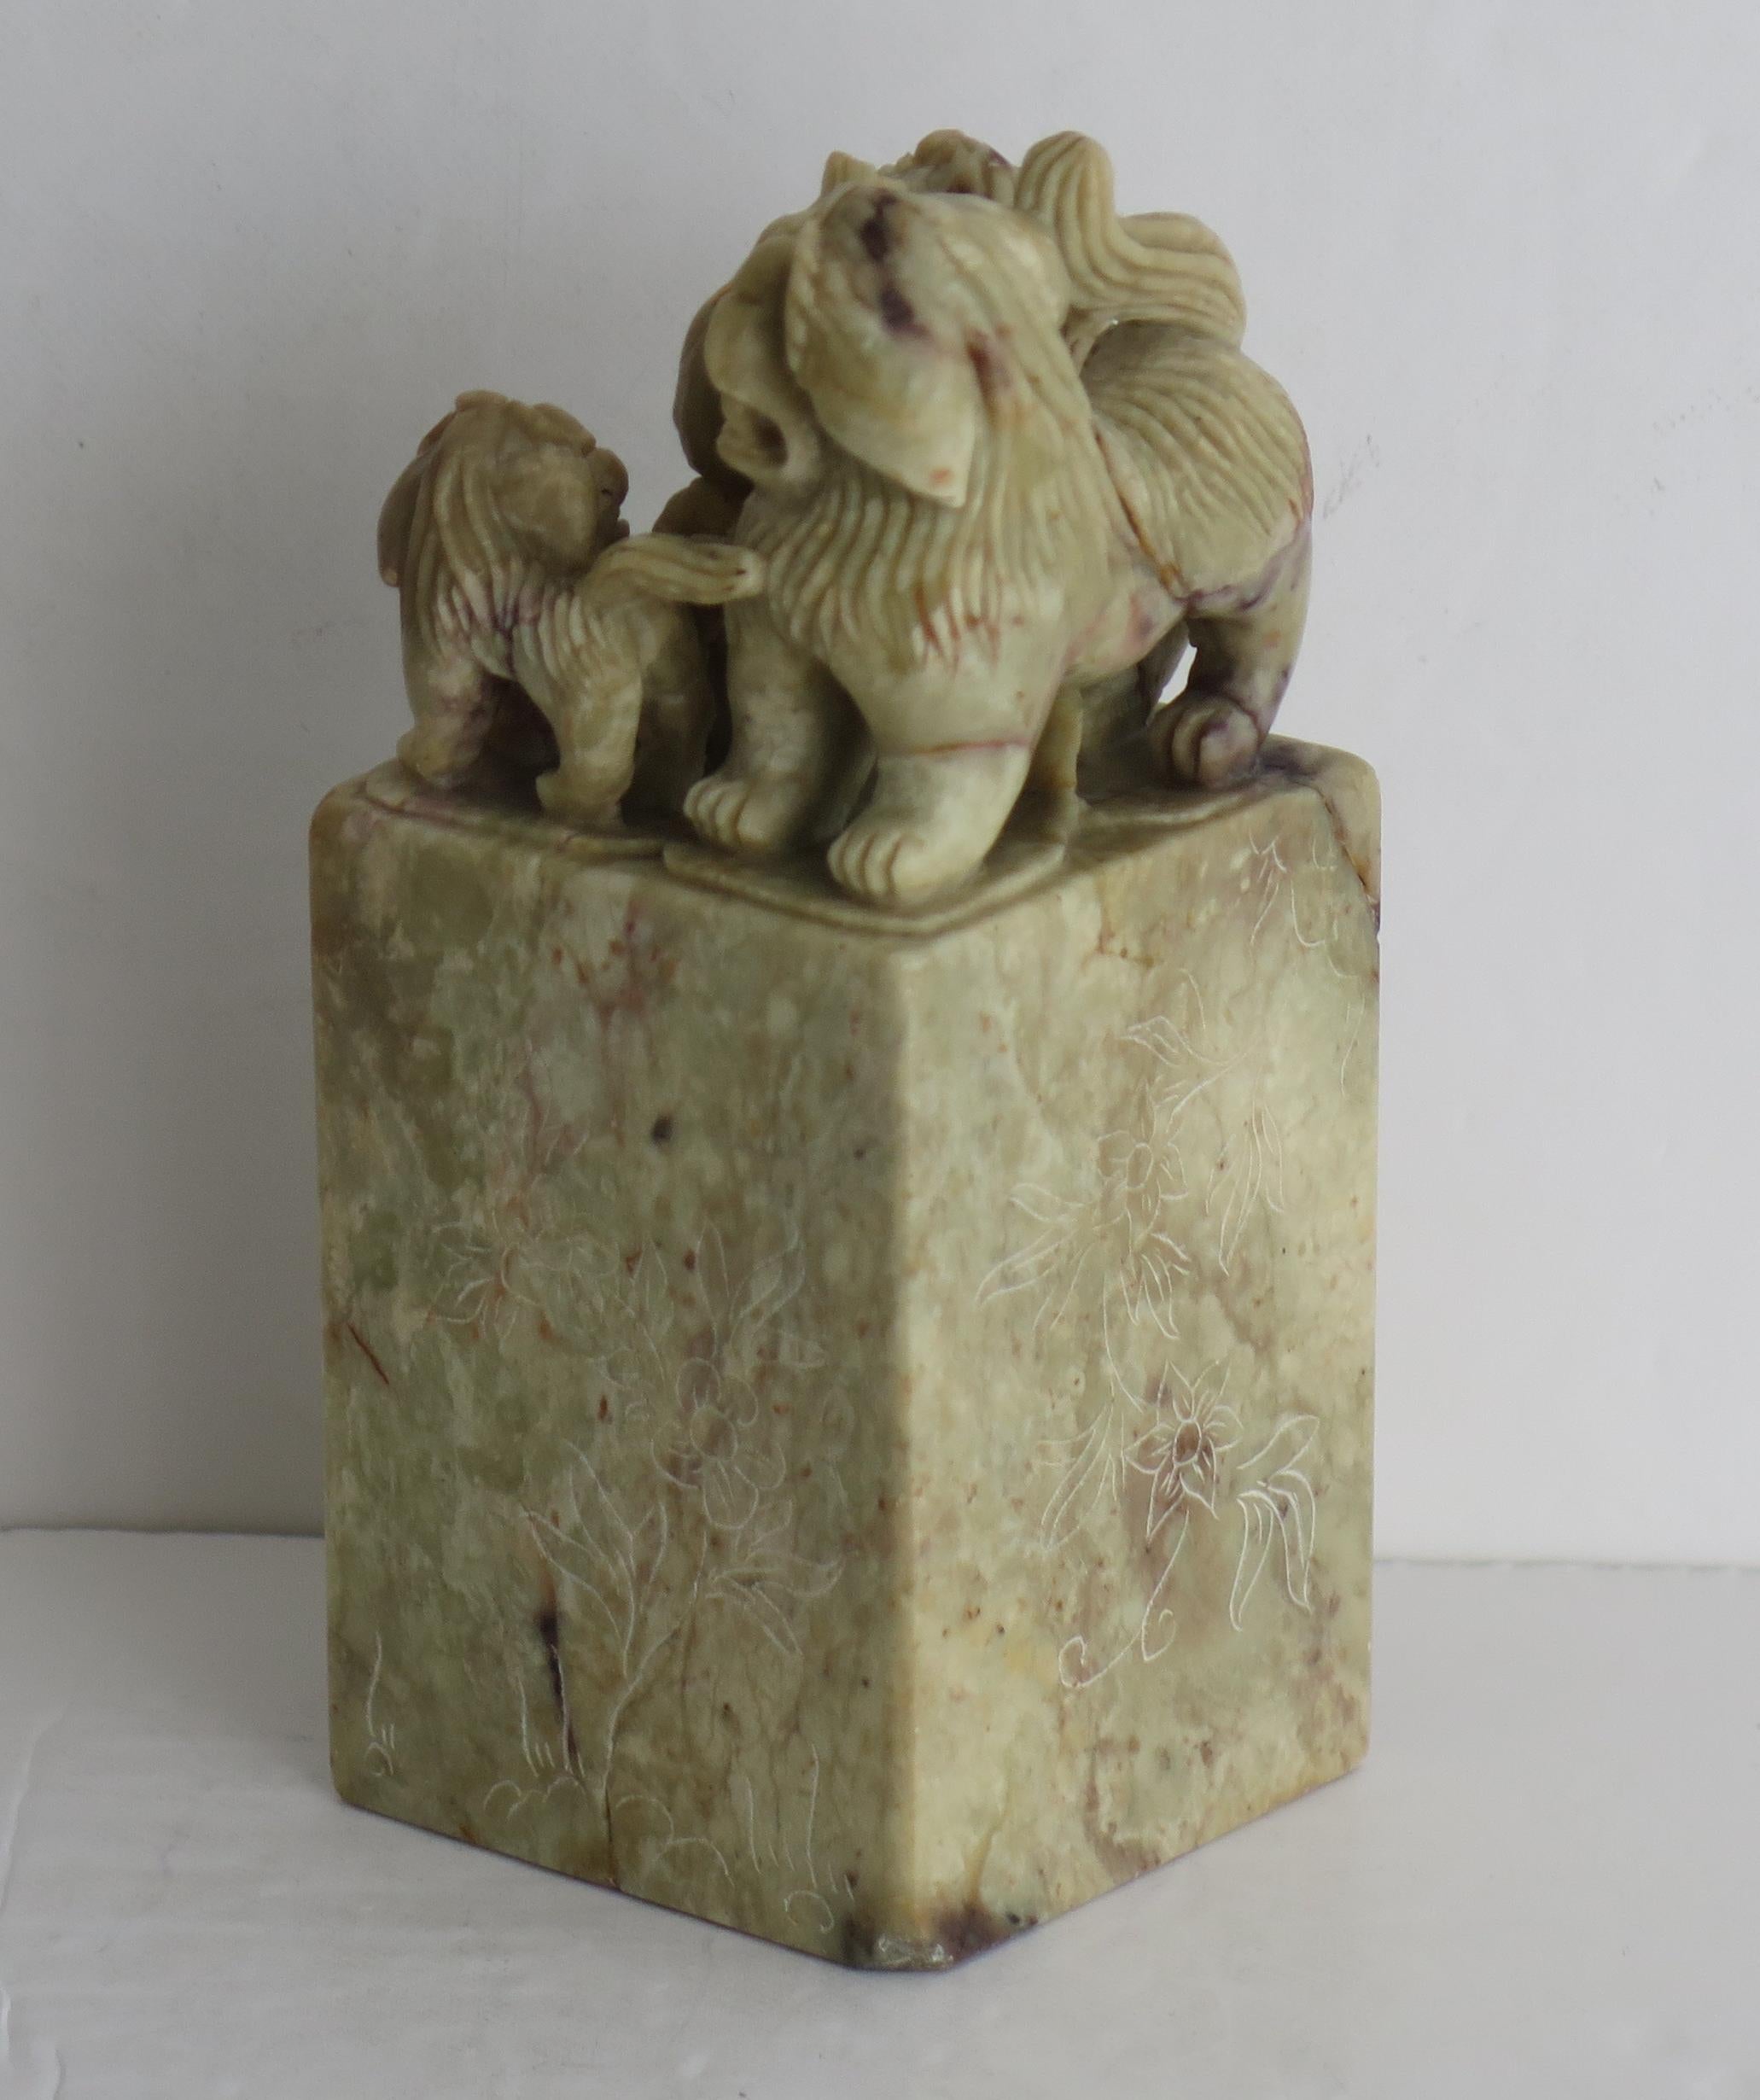 Hand-Carved Chinese Hand Carved Soapstone Foo Dogs, 19th Century Qing